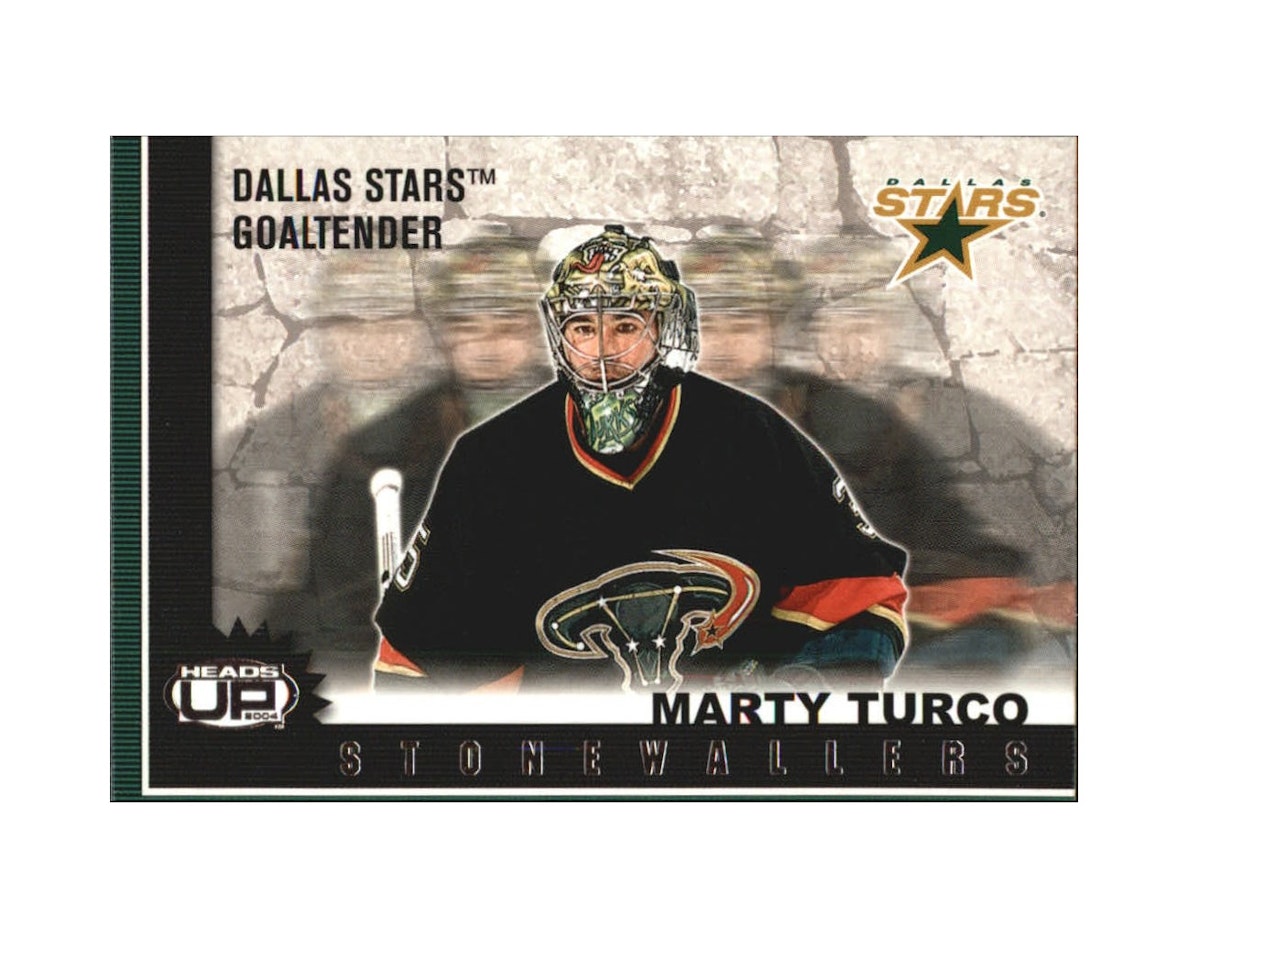 2003-04 Pacific Heads Up Stonewallers #4 Marty Turco (10-X66-NHLSTARS)